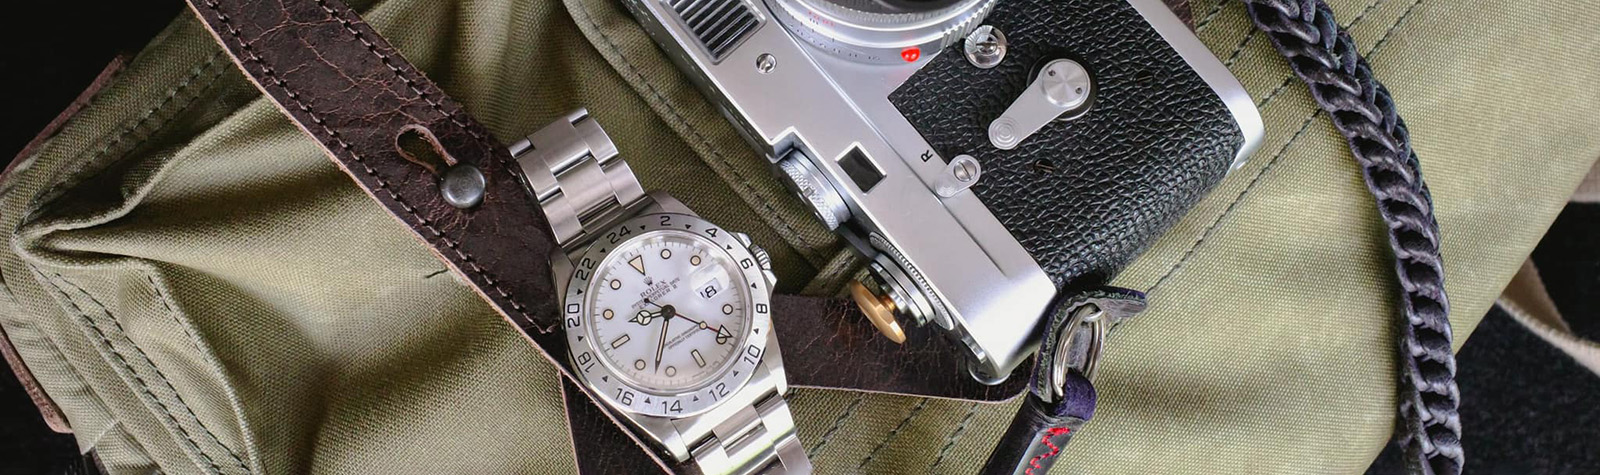 If you don’t understand Leica cameras and want to understand Leica cameras – luxury watches might help. 